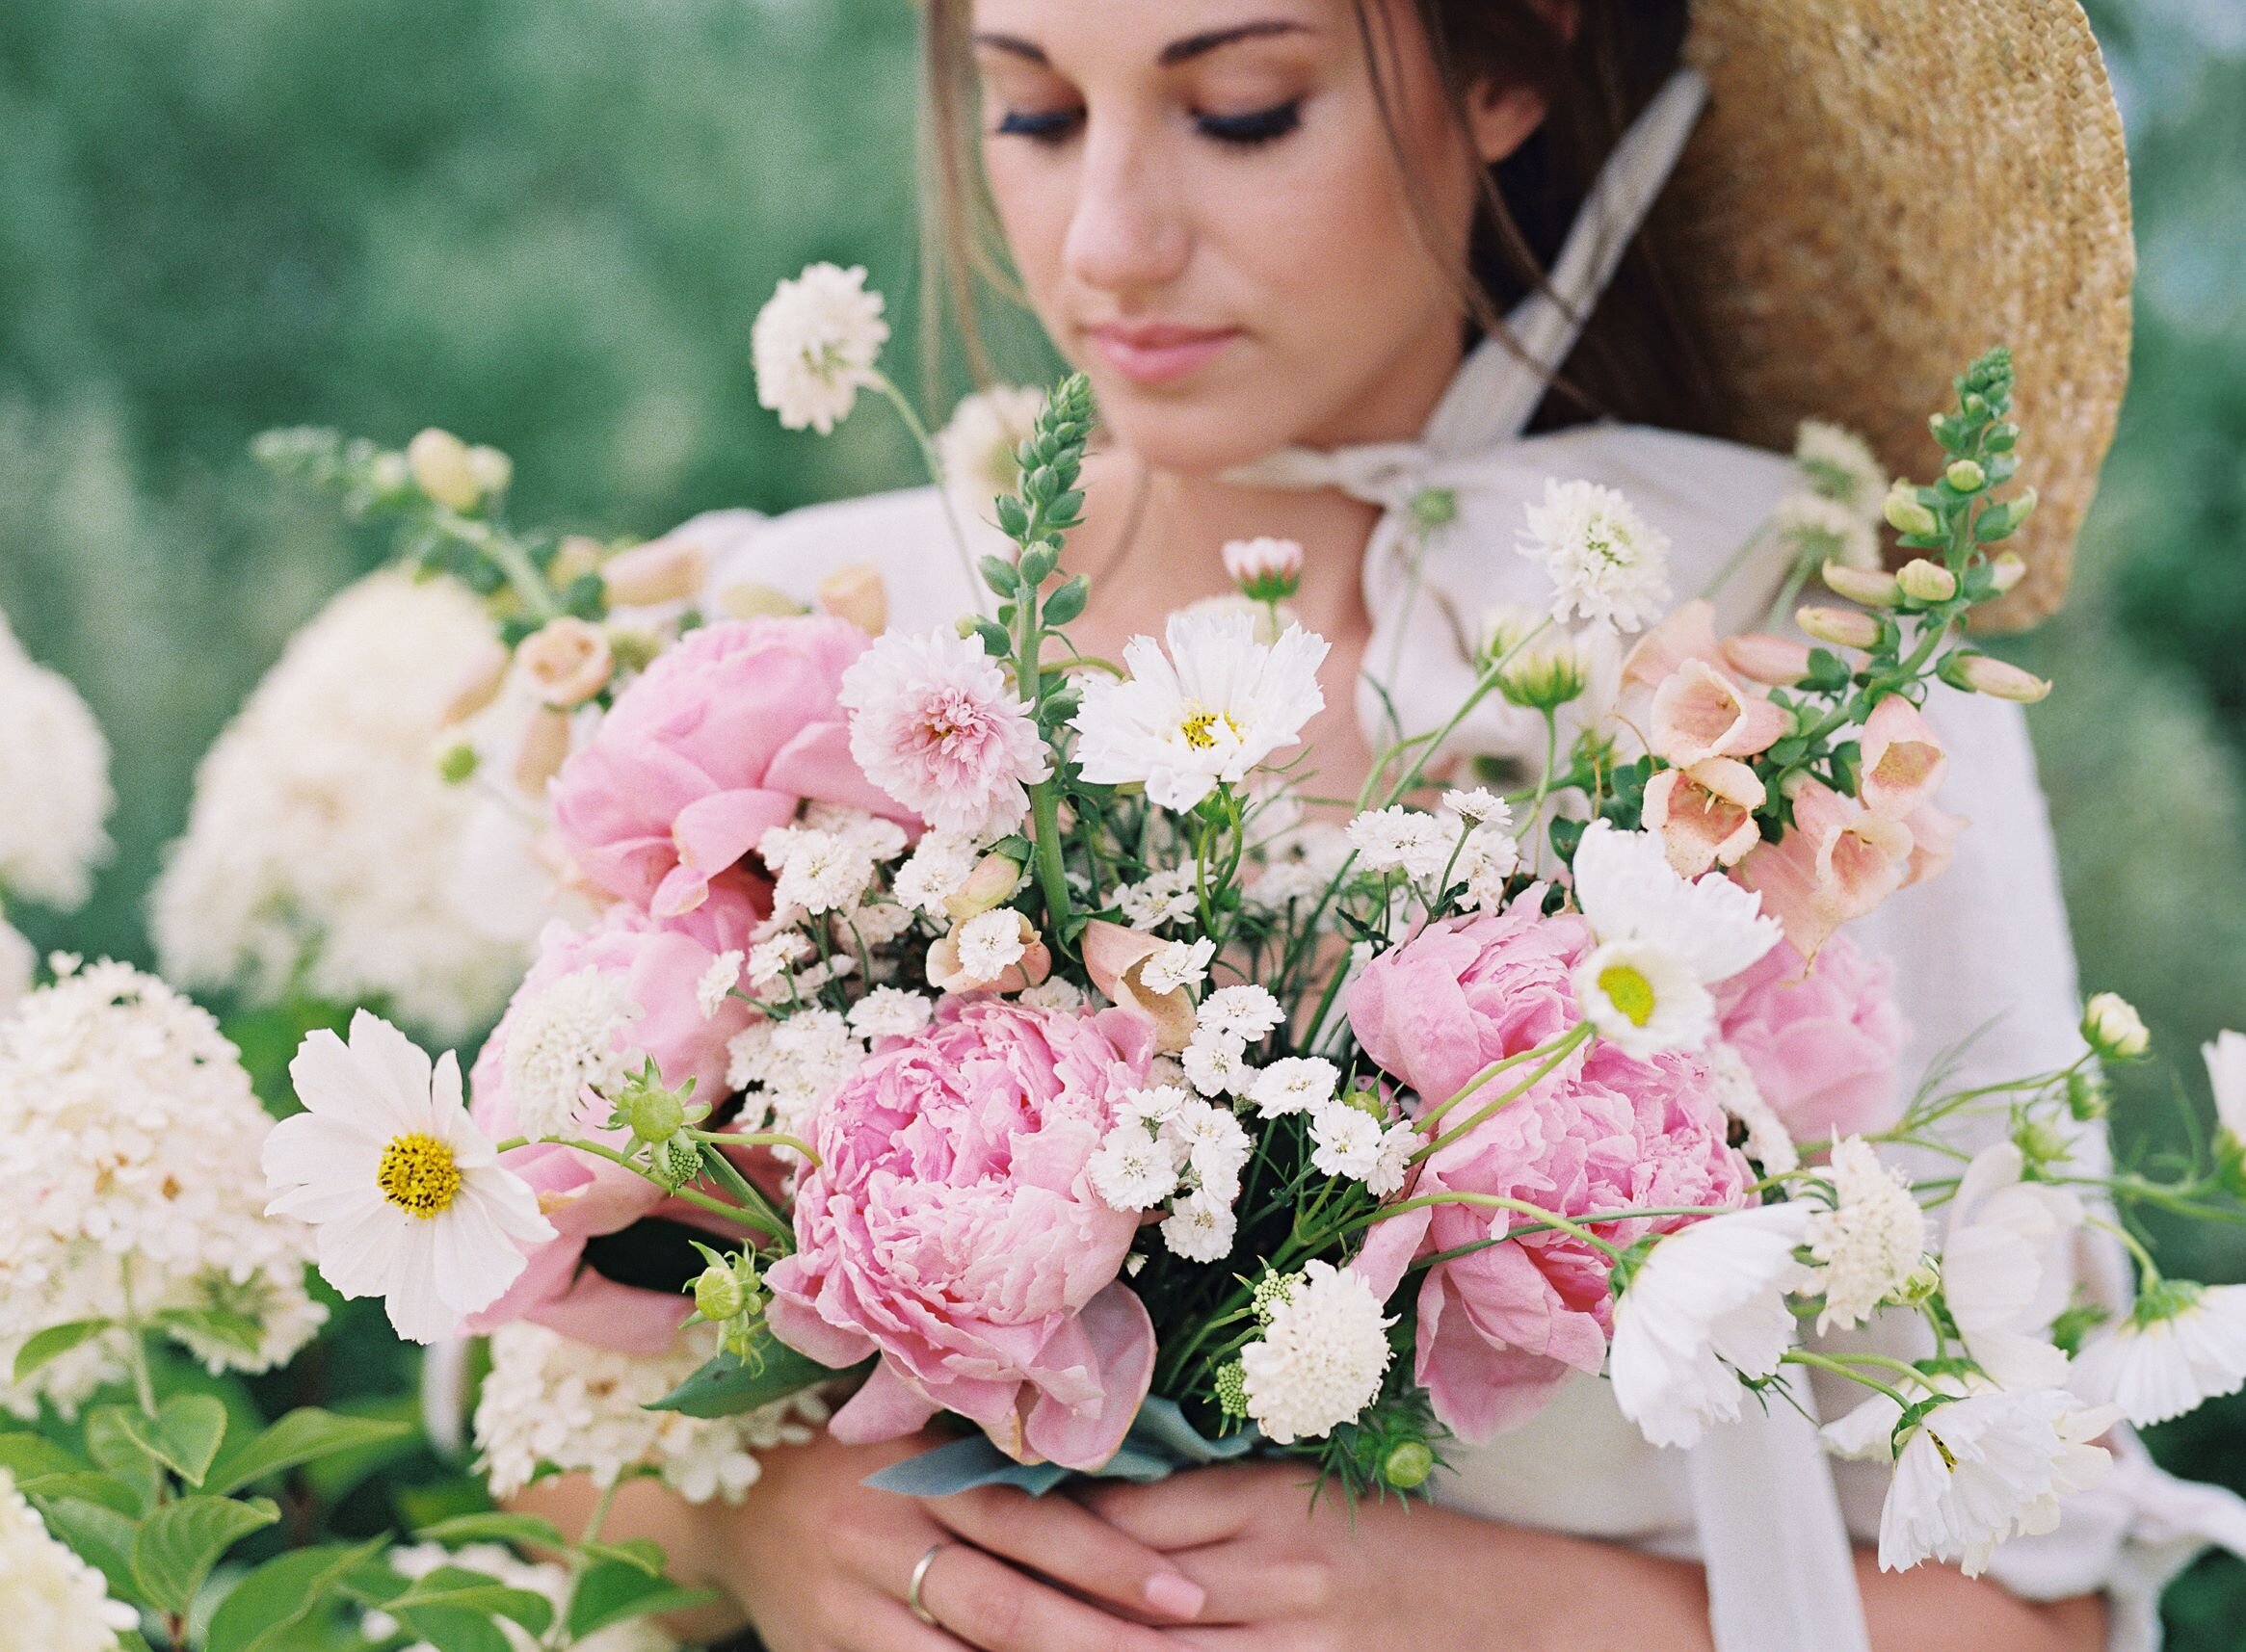 Rose_and_Laurel_Bouquet_at_Blue_Sky_Flower_Farm_Shasta_Bell_Photographie.jpg